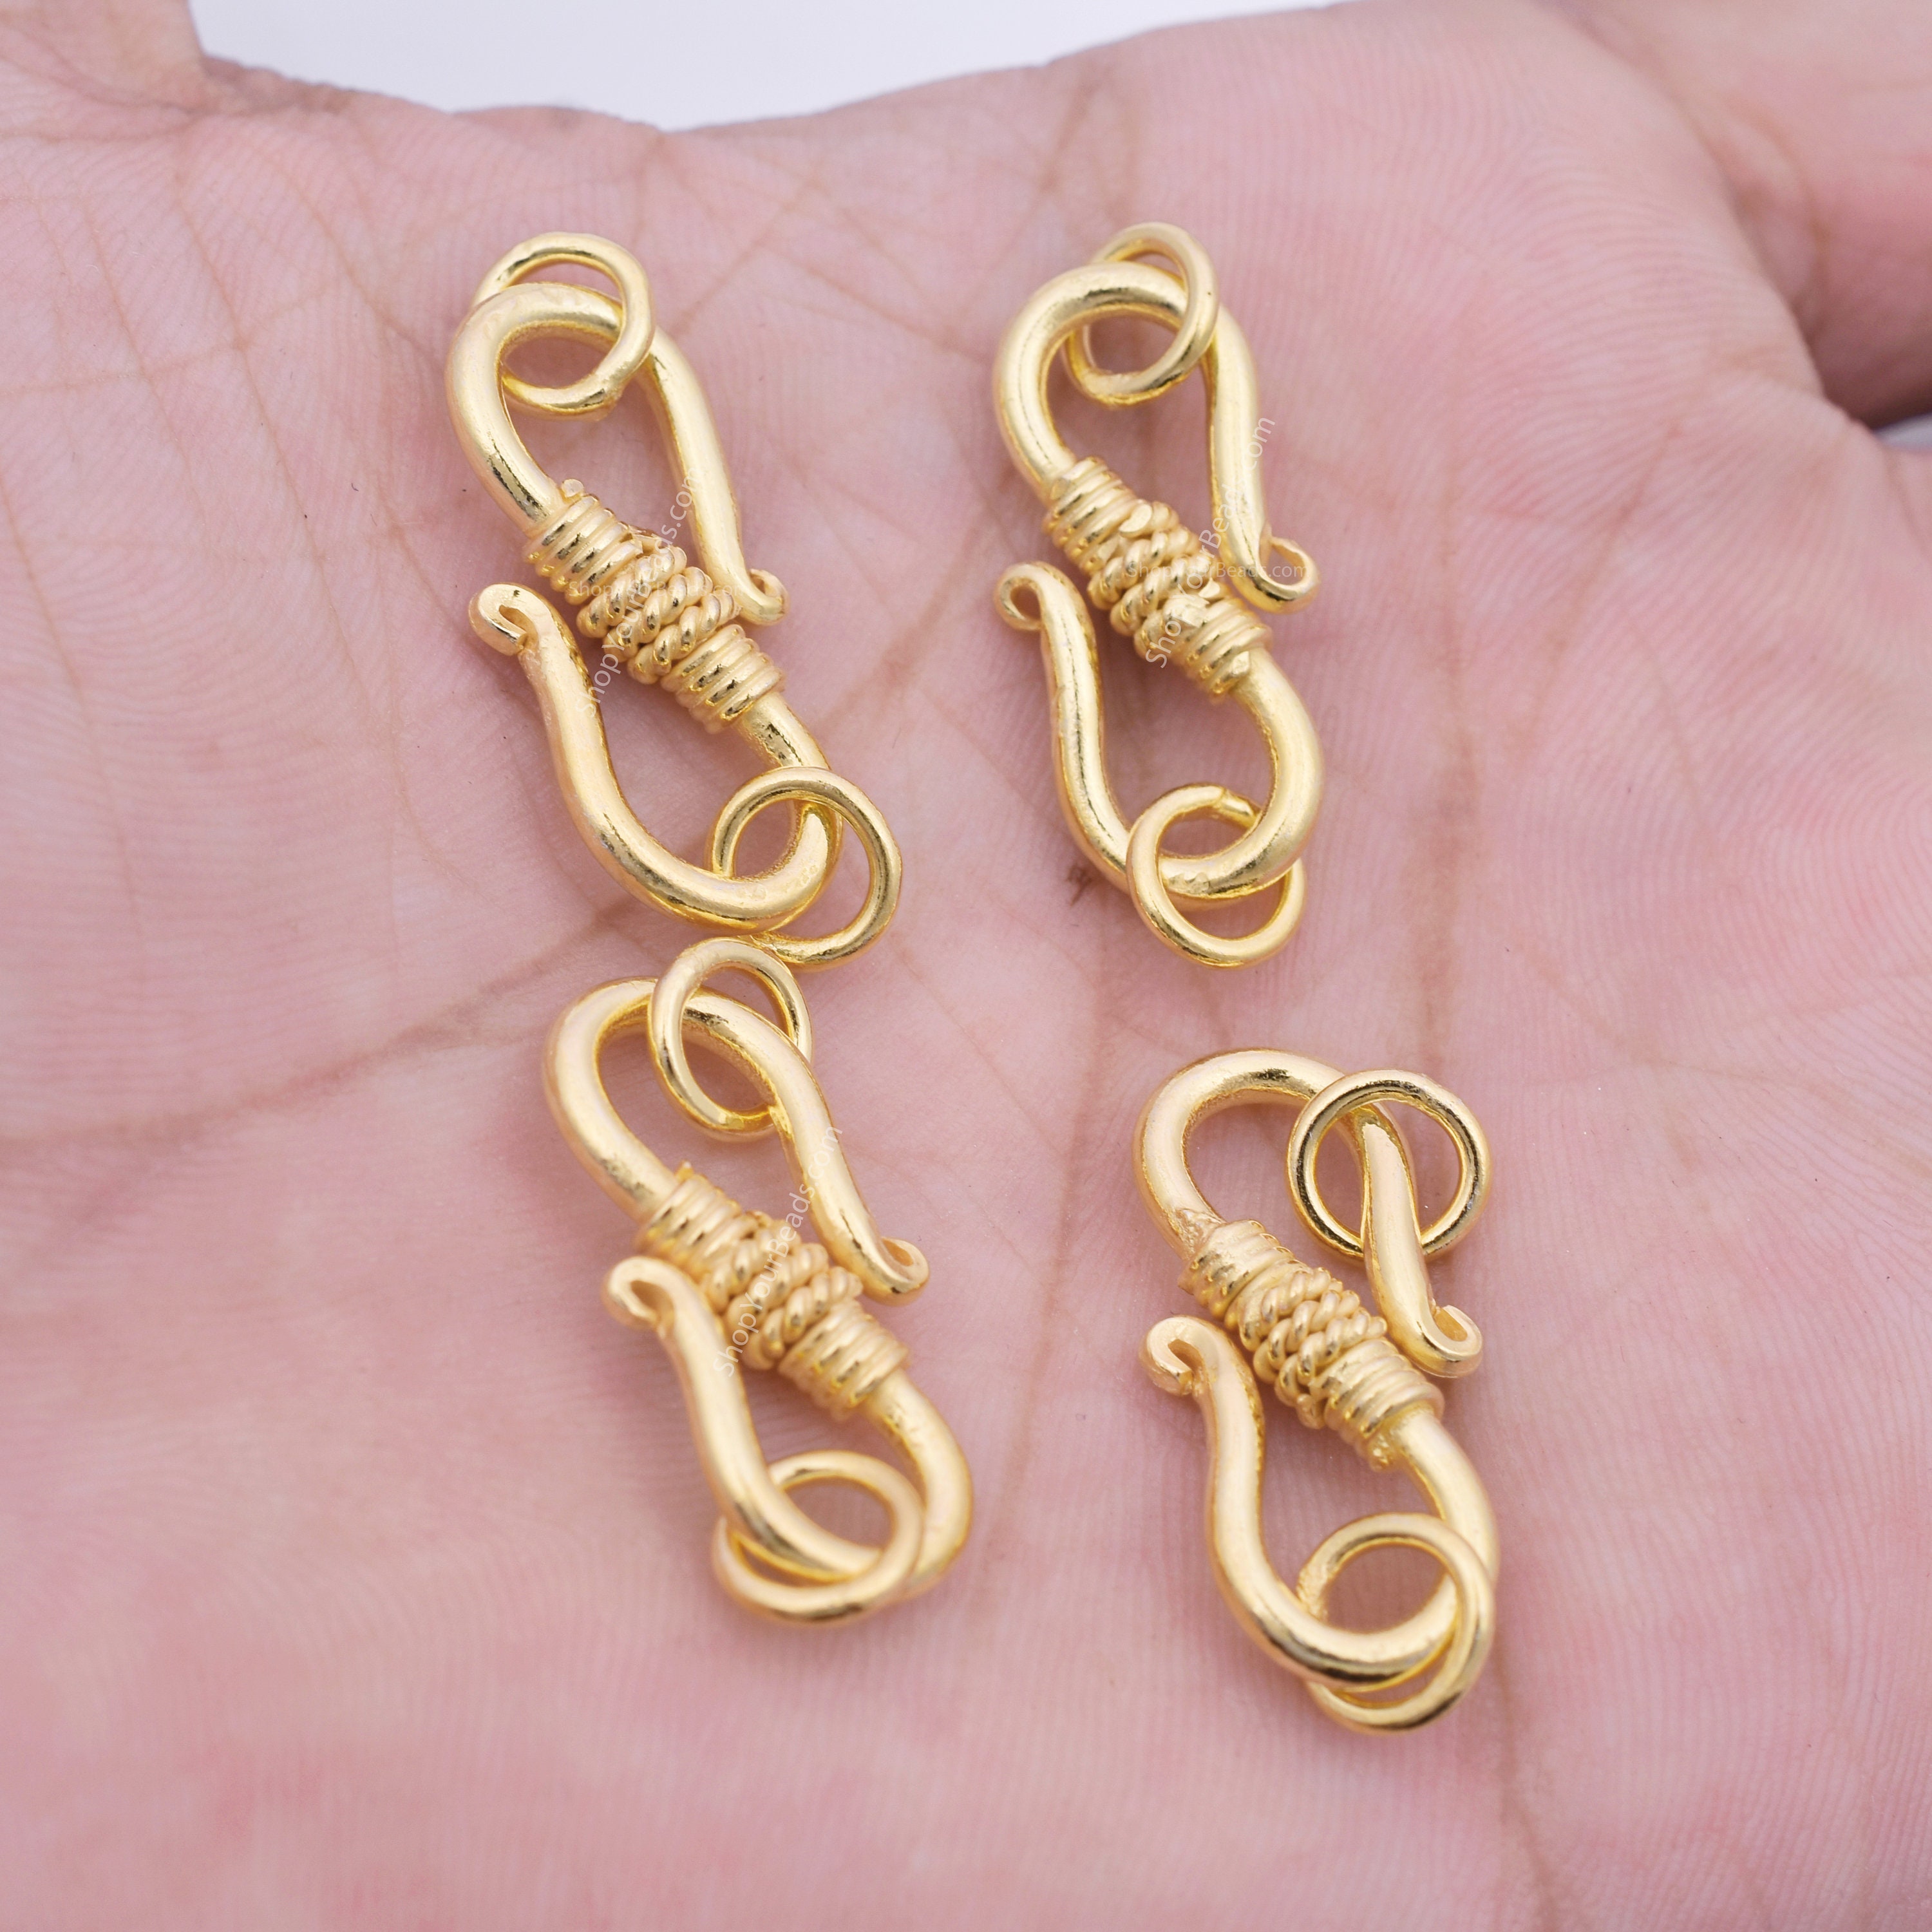 Toggle clasps gold, T bar ring, large 24K gold plated jewelry clasp,  necklace clasps, bracelet clasp, closures for necklaces bracelets, T5